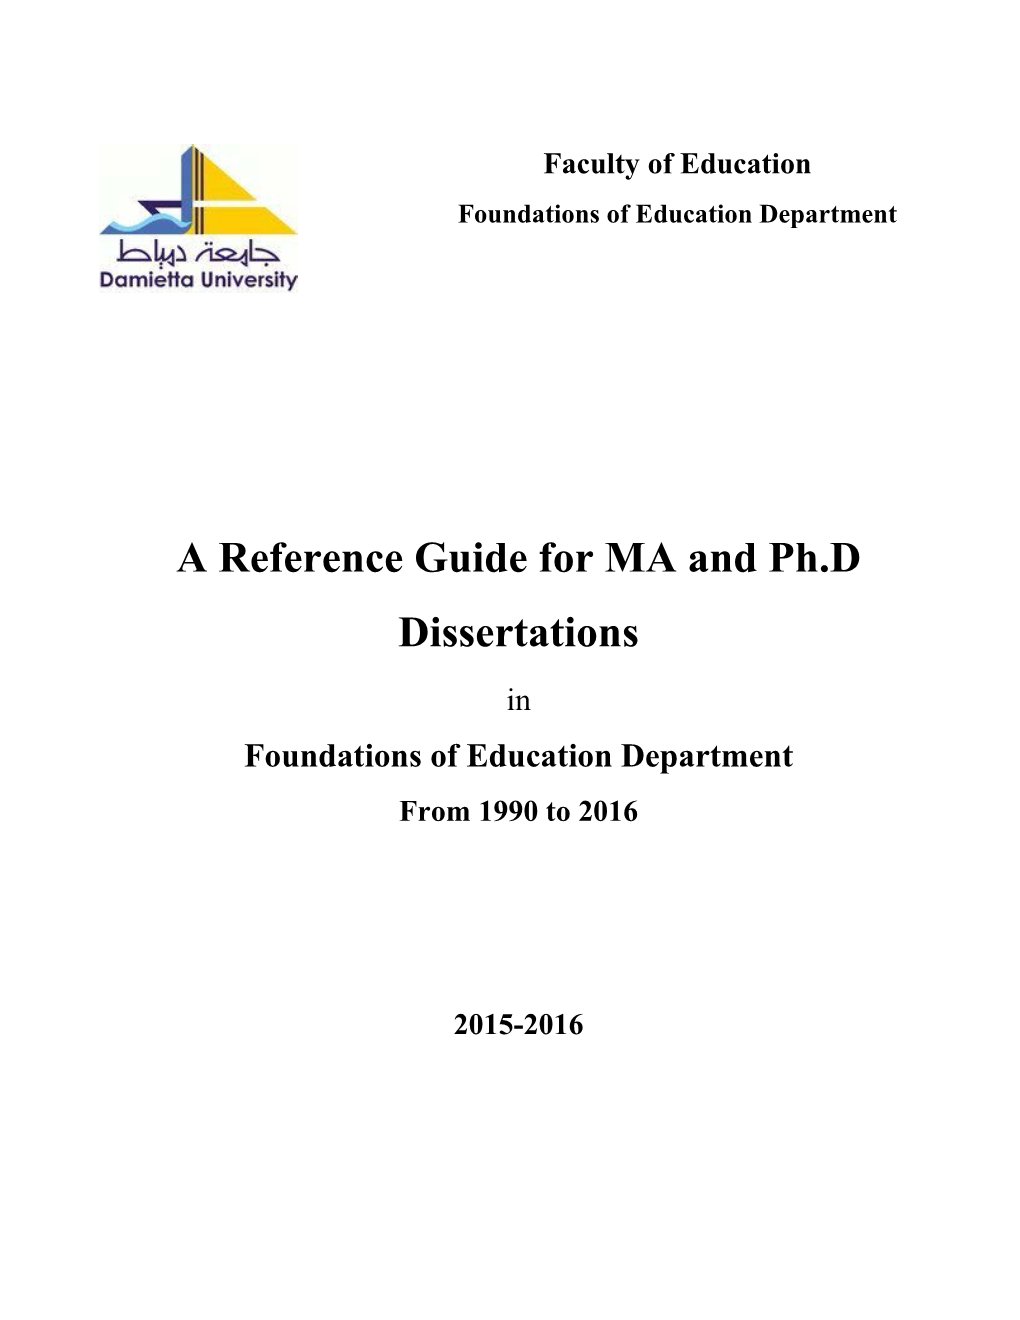 A Reference Guide for MA and Ph.D Dissertations in Foundations of Education Department from 1990 to 2016